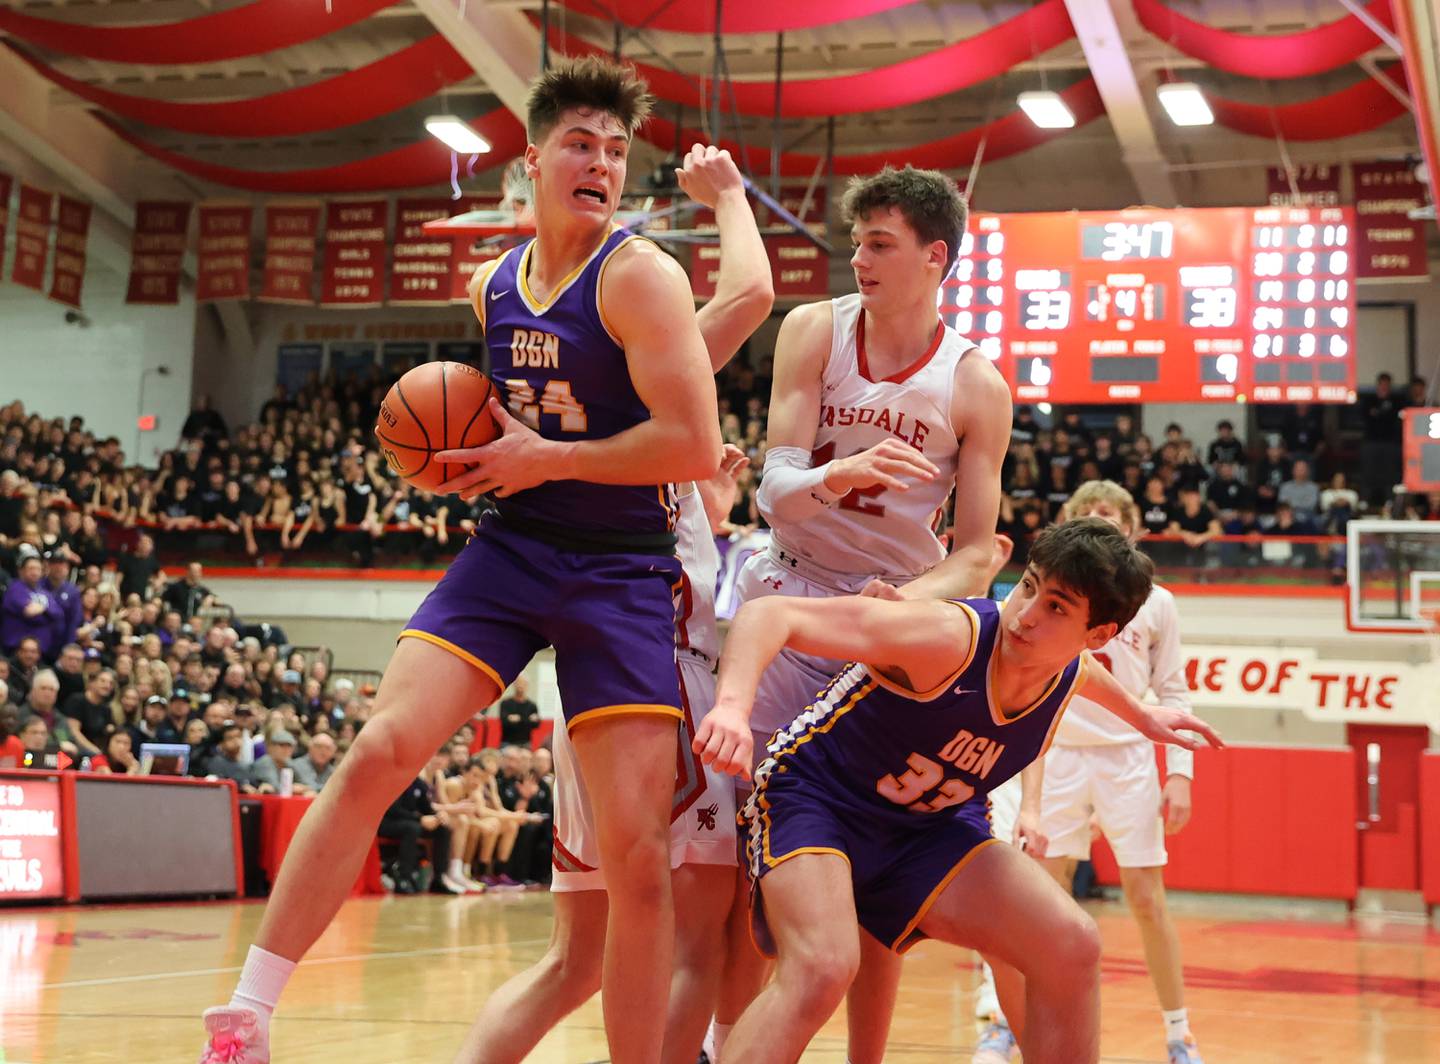 Downers Grove North's George Wolkow (24) grabs a rebound during the boys 4A varsity sectional final game between Hinsdale Central and Downers Grove North high schools in Hinsdale on Friday, March 3, 2023.